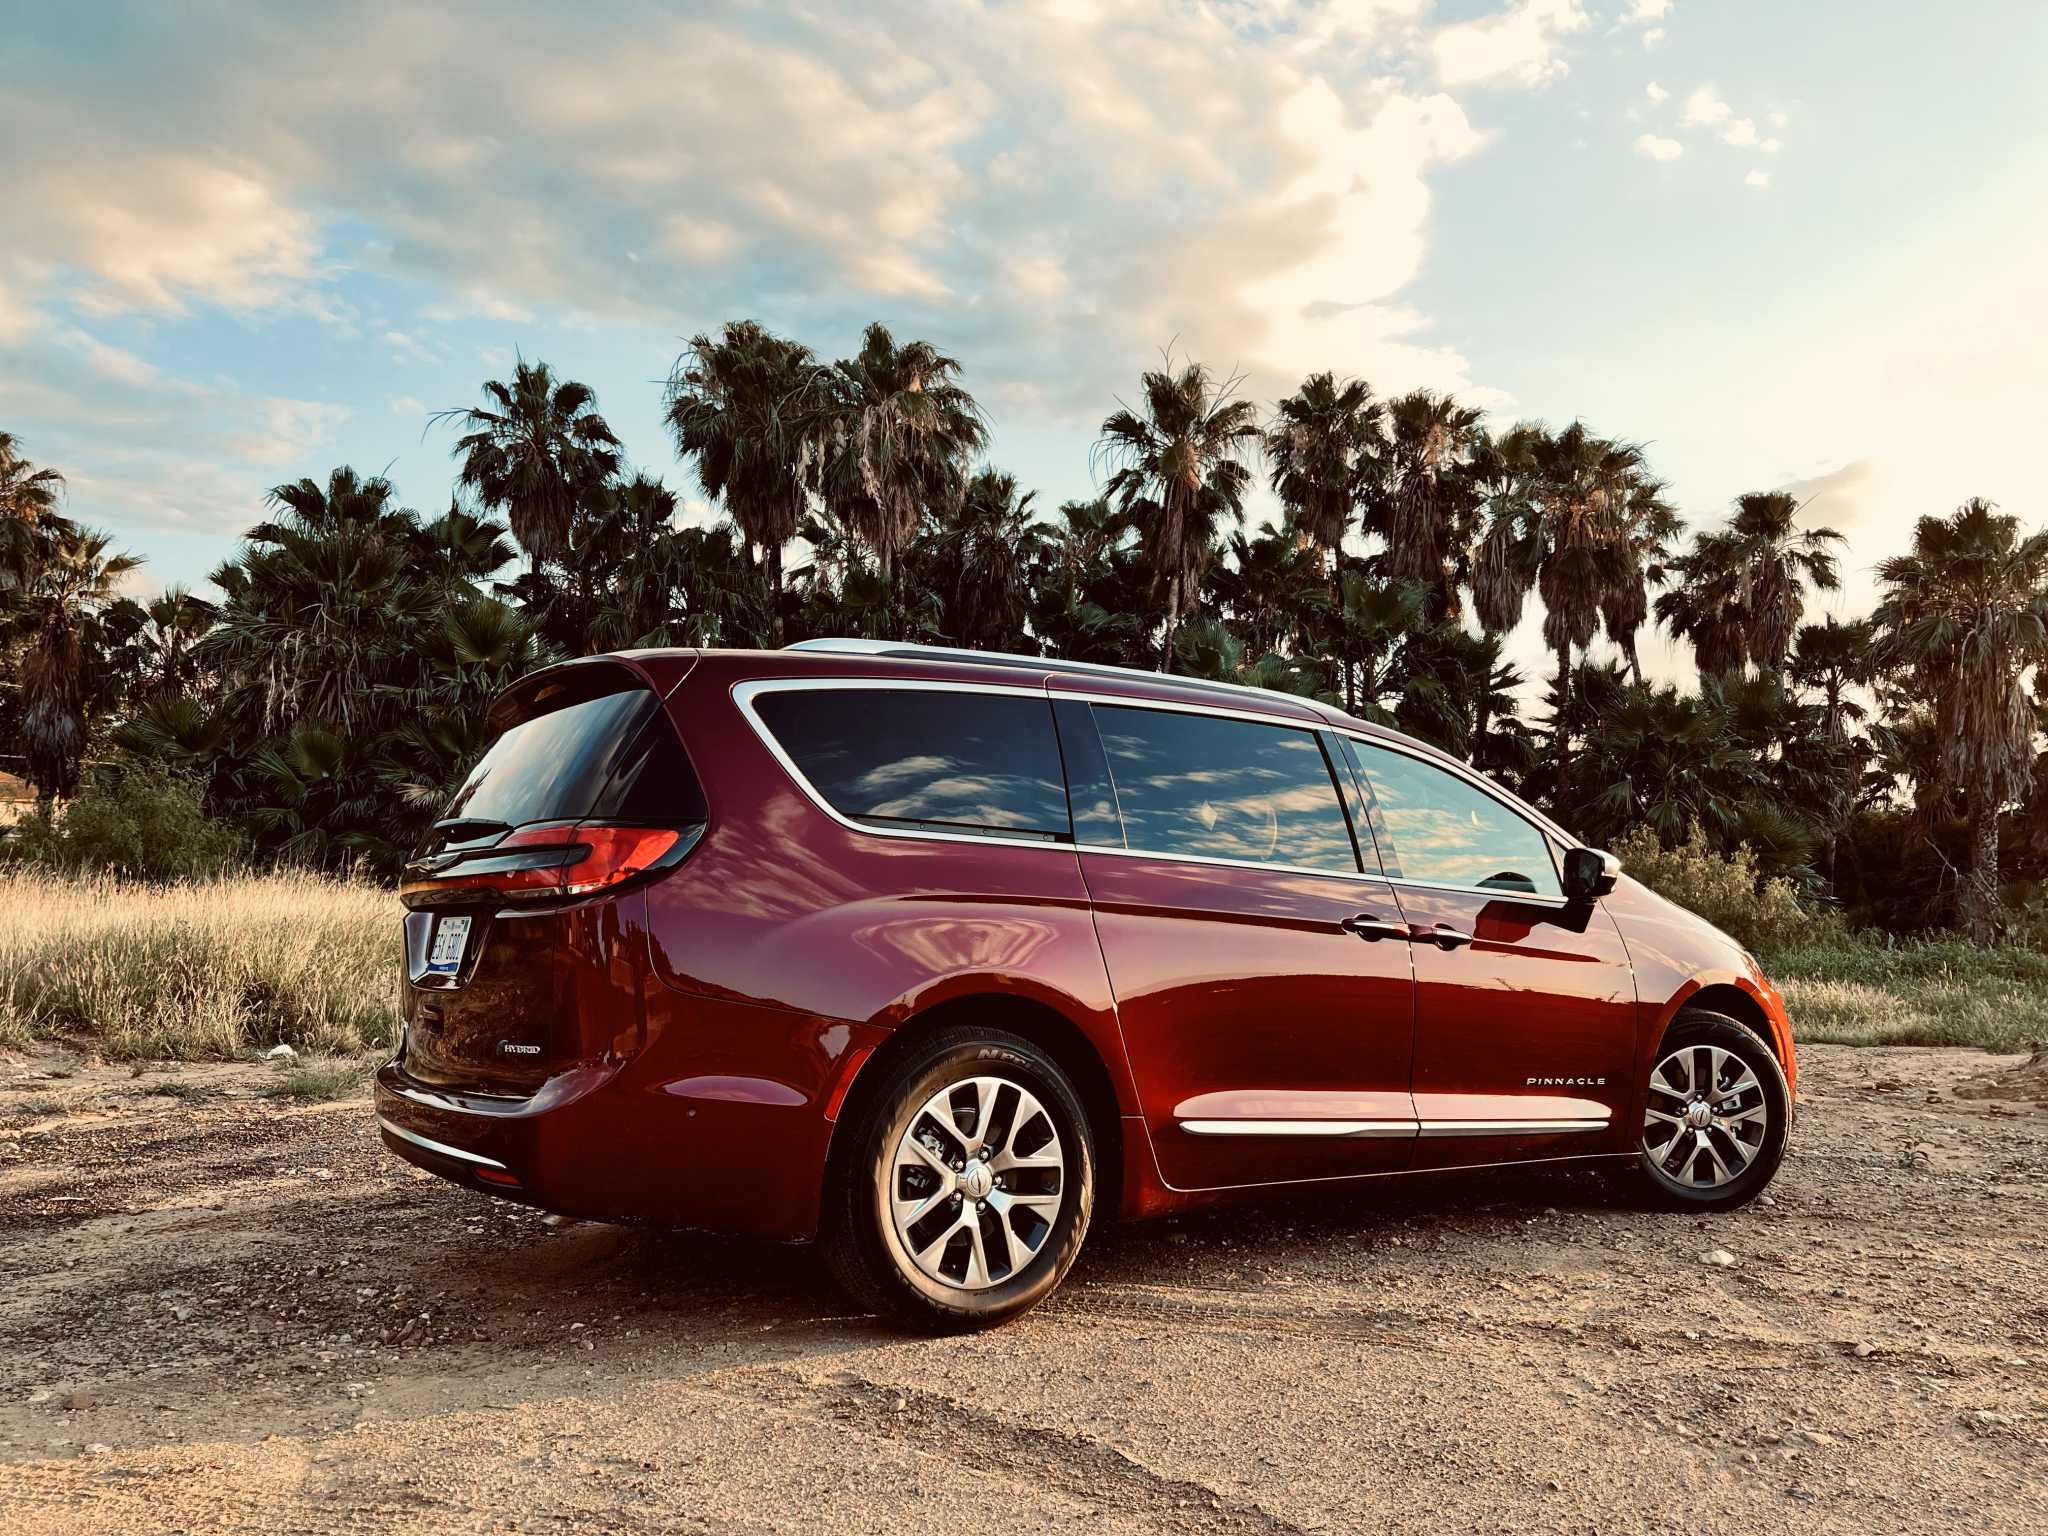 Chrysler Pacifica Pinnacle minivan is the right tool for family